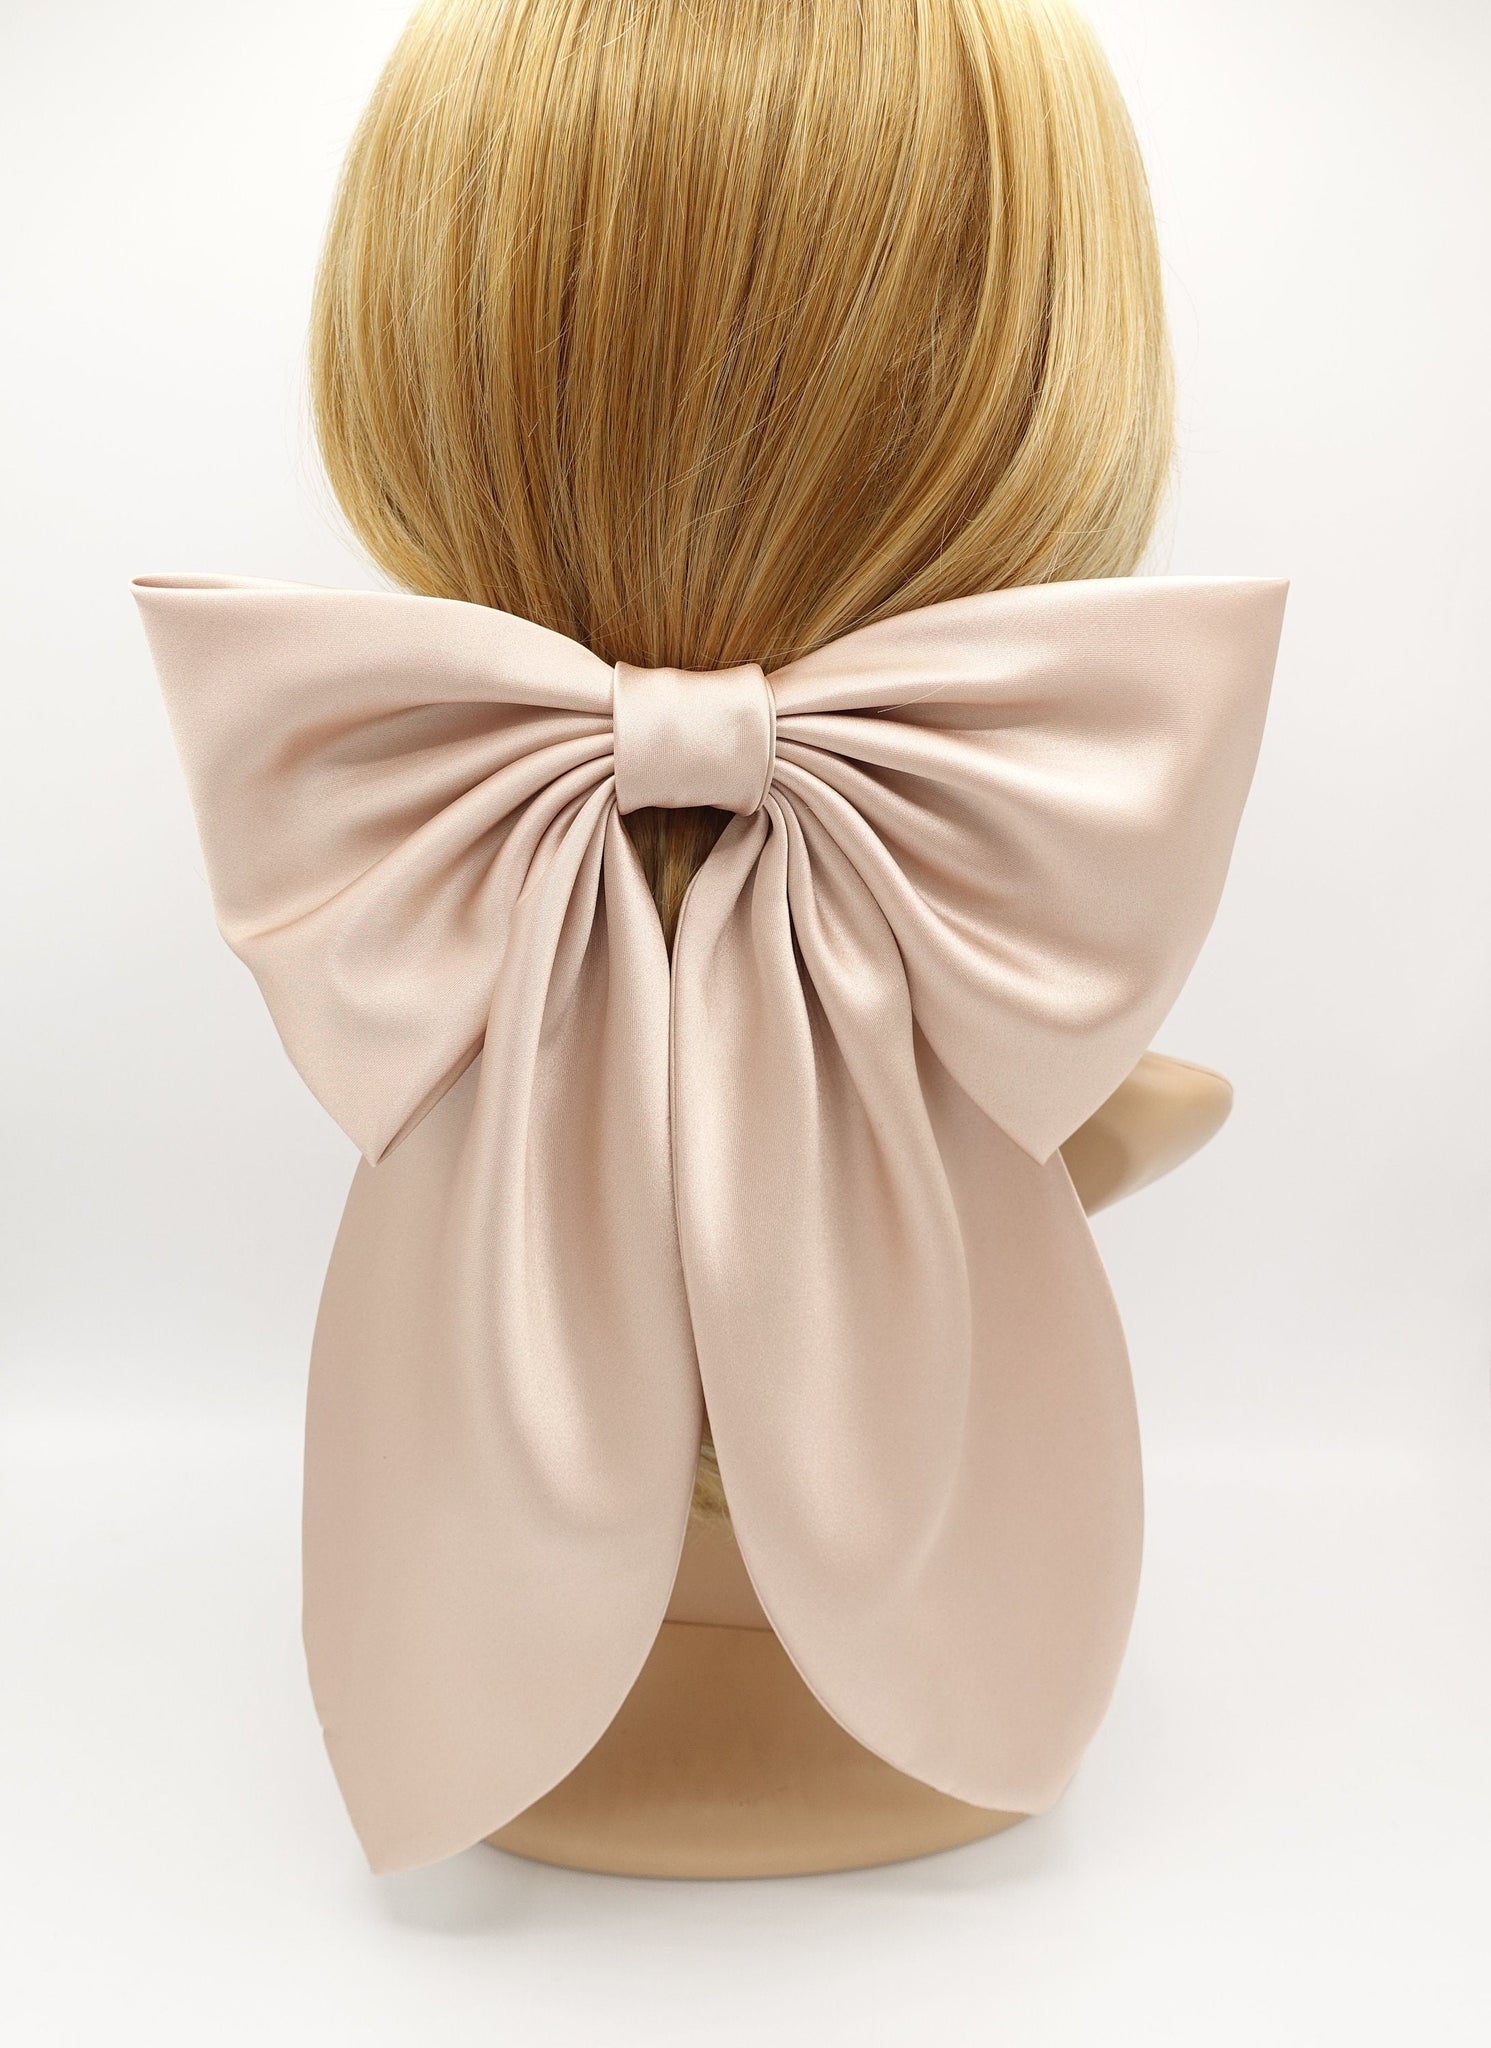 veryshine.com Barrette (Bow) Blush pink plus grand satin hair bow long tail large hair accessory for women